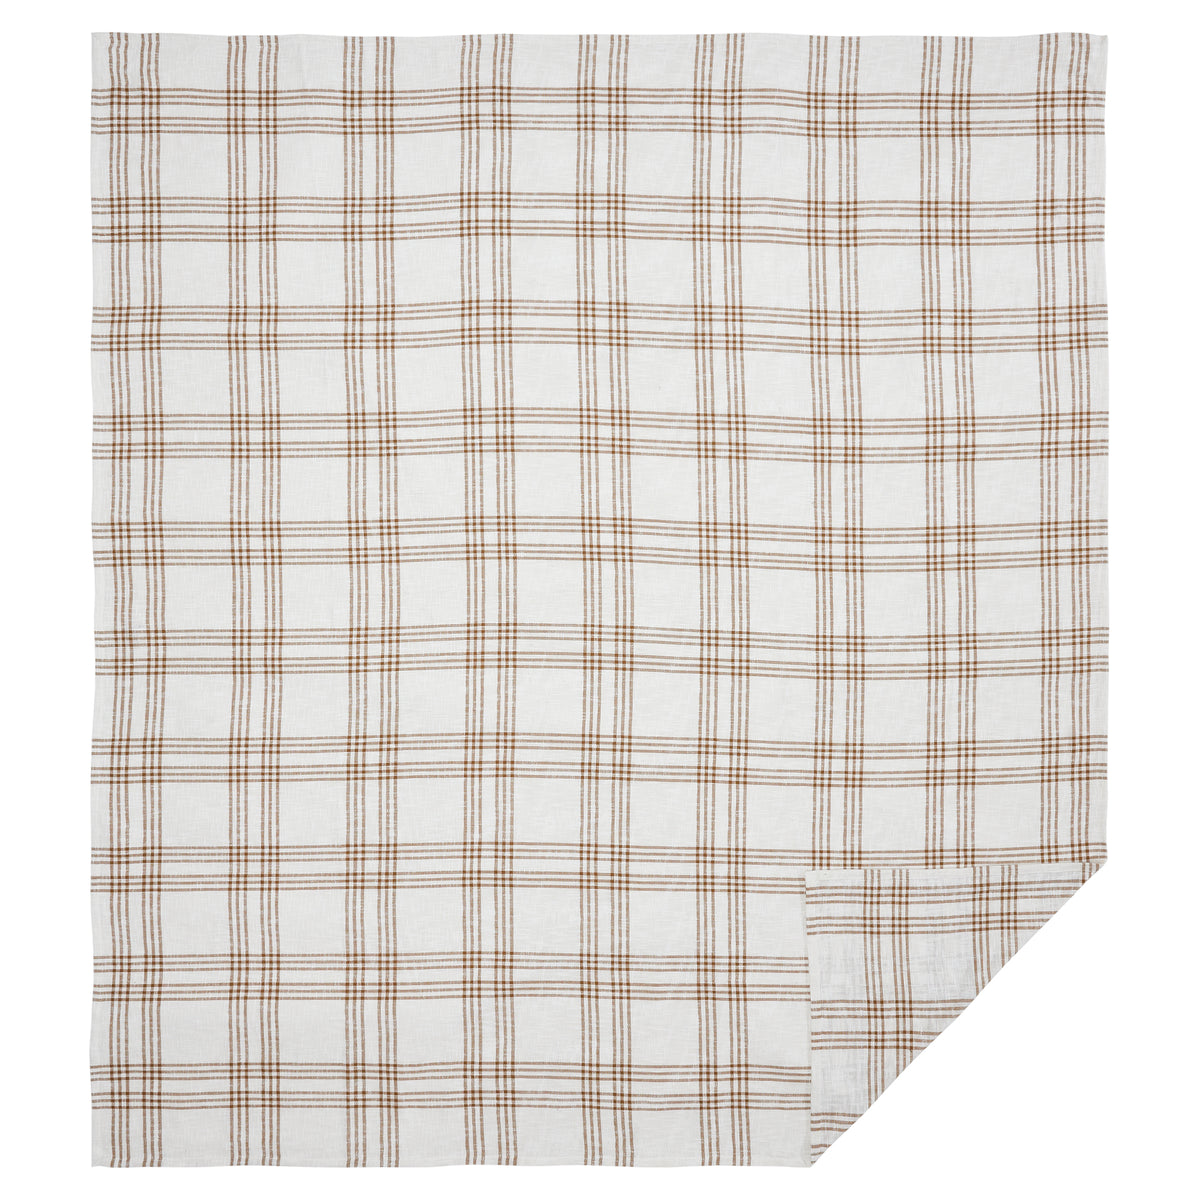 April & Olive Wheat Plaid Queen Coverlet 94x94 By VHC Brands